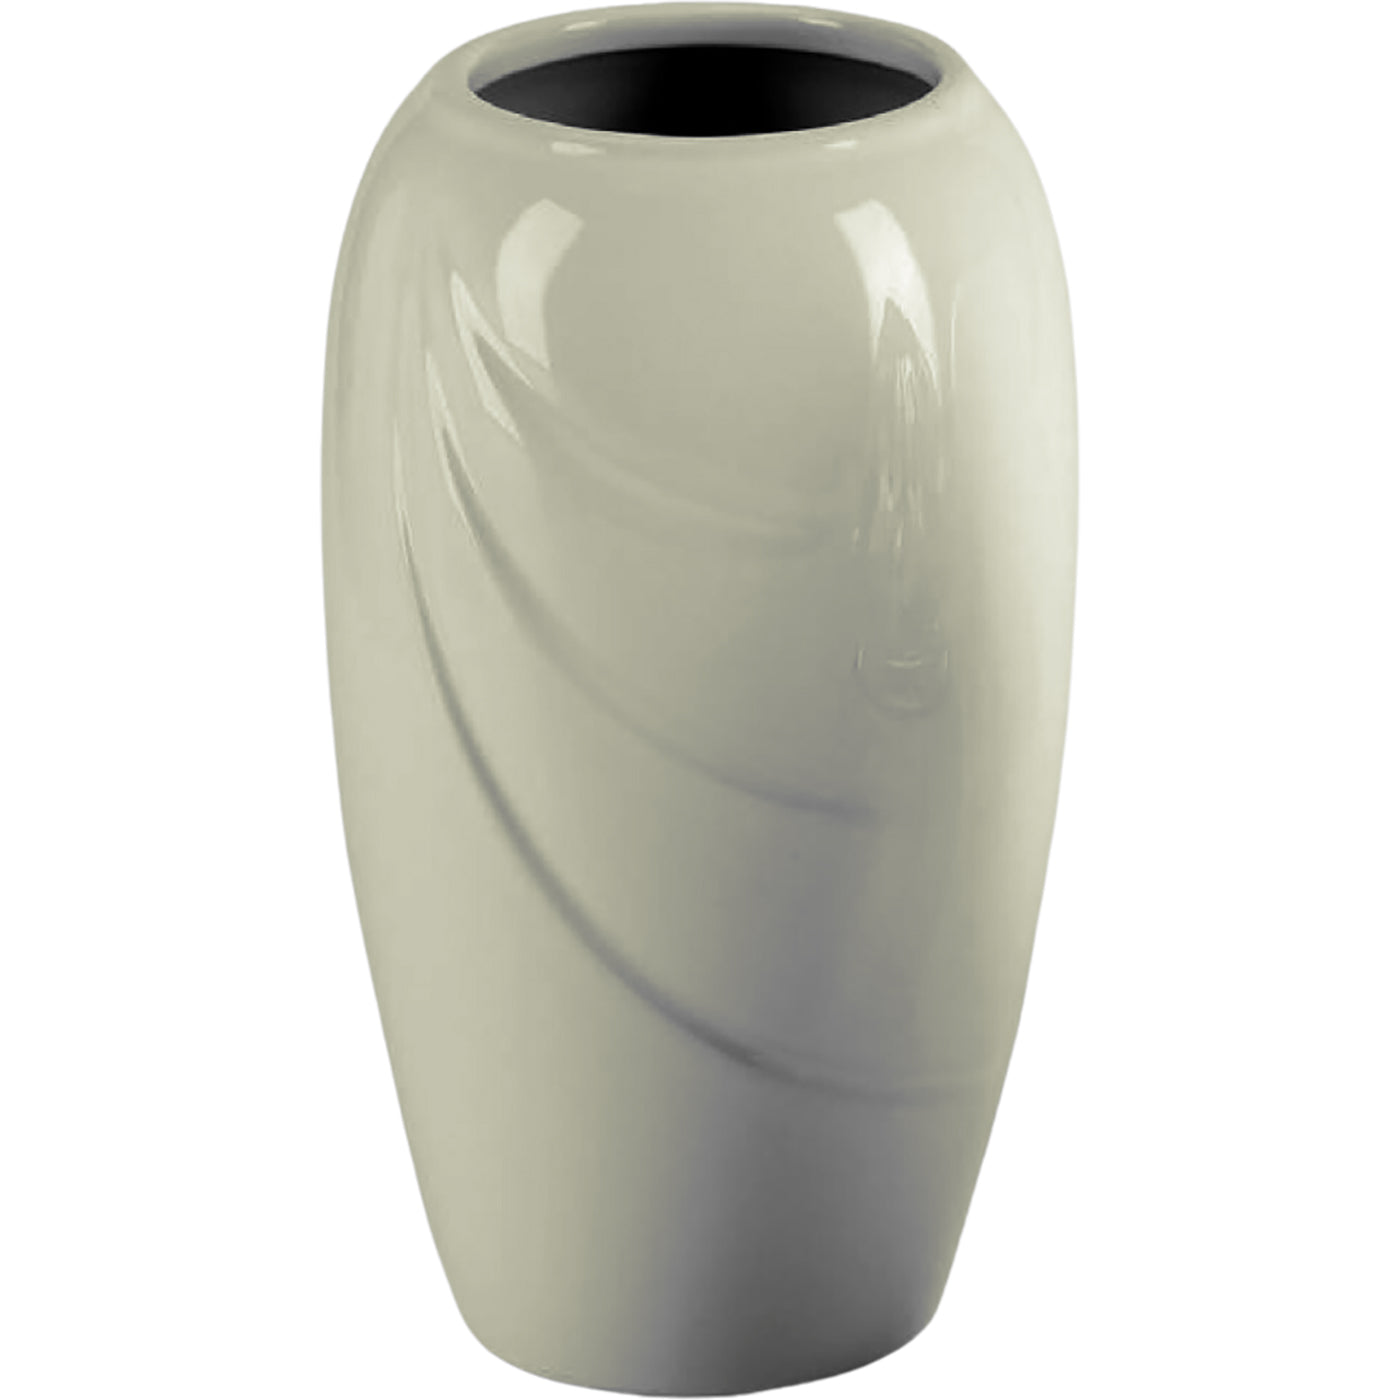 Grave vase Ecotre ivory 21x13cm - 8.3x5.1in In ivory porcelain, ground attached ECO150T/A